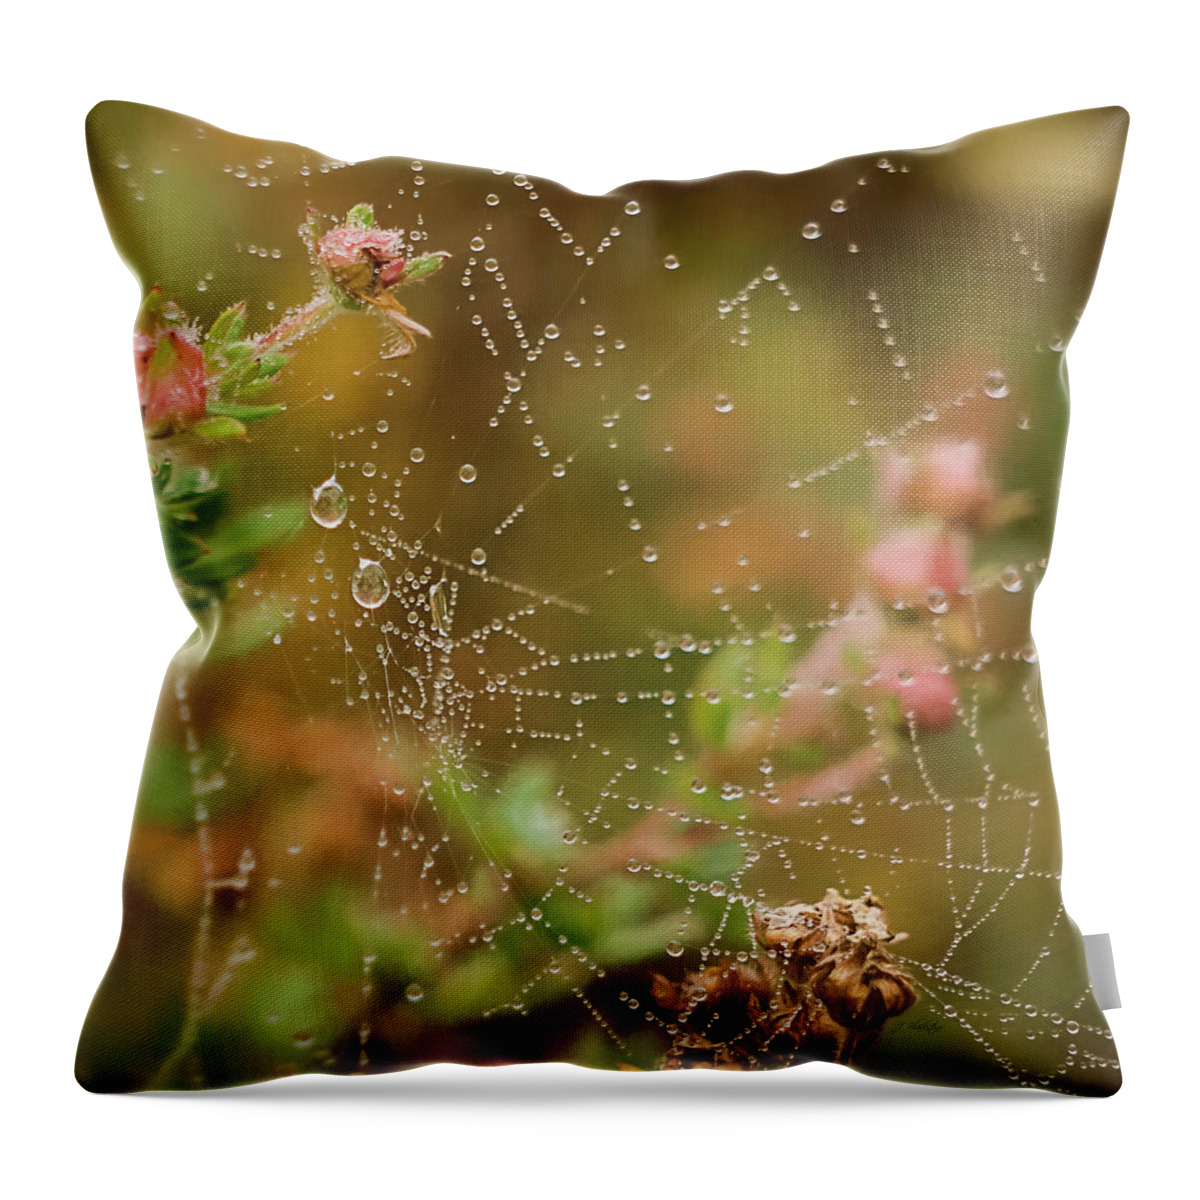 Fairy Whispers Throw Pillow featuring the photograph Fairy Whispers - Nature Art by Jordan Blackstone